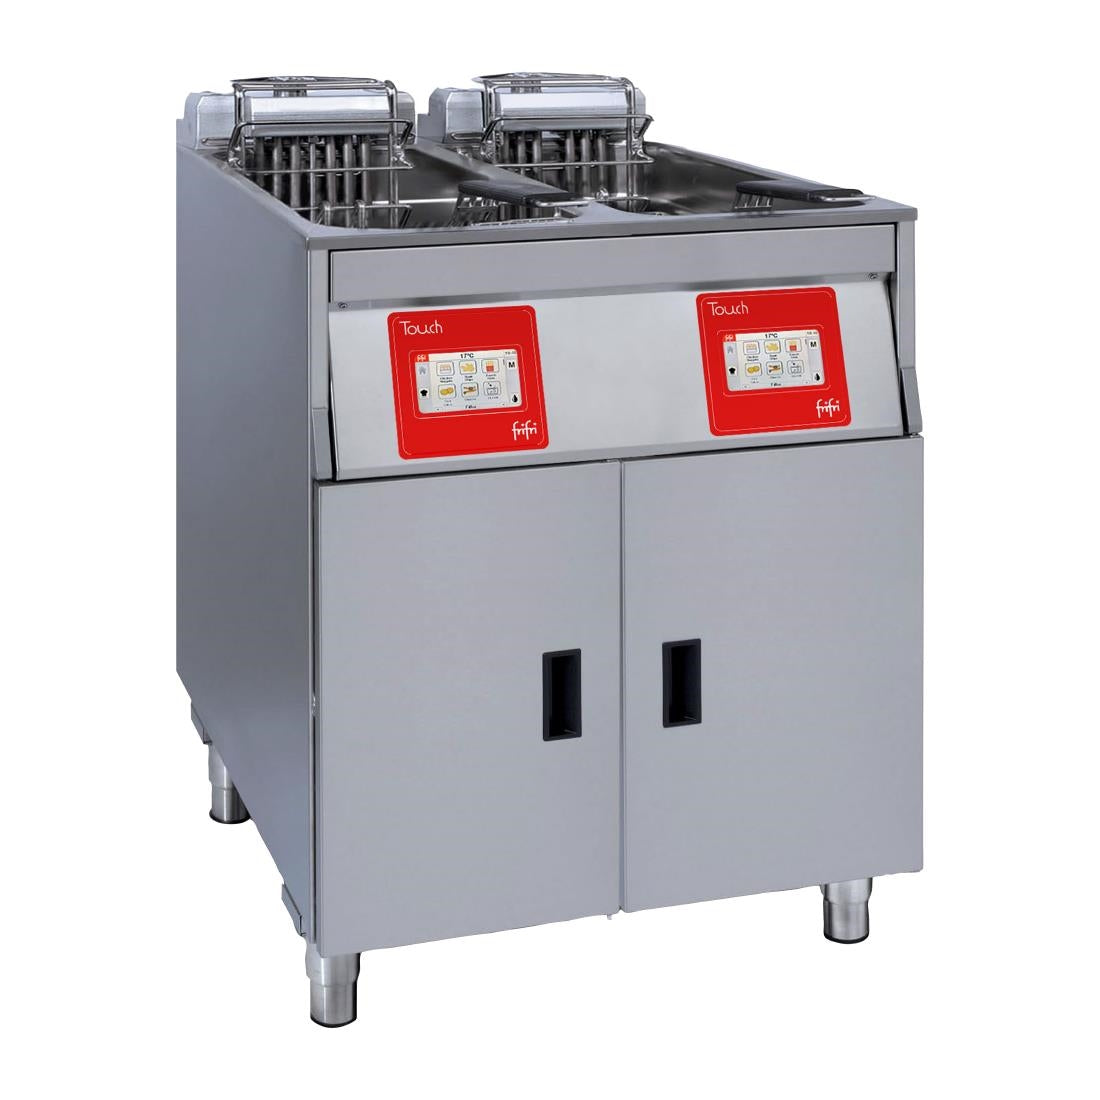 CX898 FriFri Touch 622 Electric Free Standing Twin Tank Filtration Fryer TL622H32G0 JD Catering Equipment Solutions Ltd